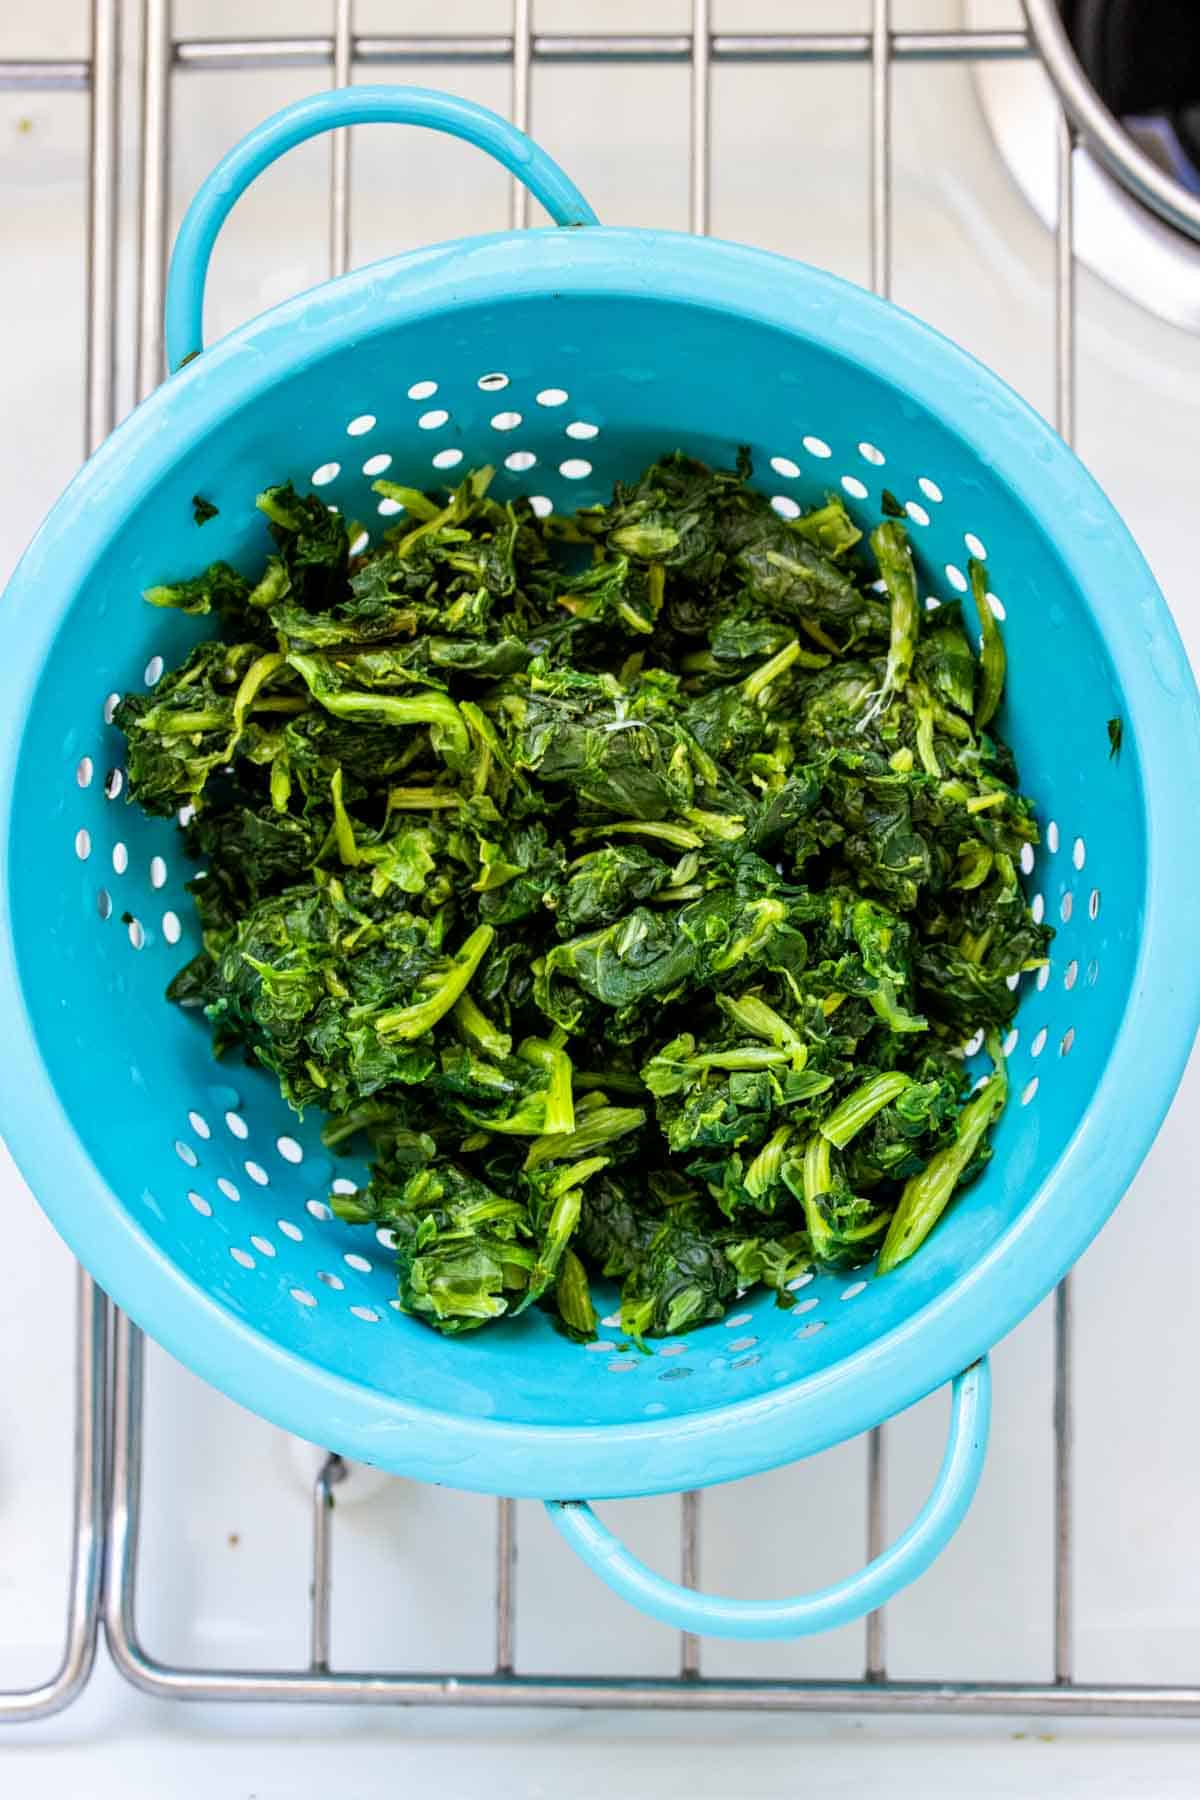 Top view of a turquoise strainer in a sink filled with chopped frozen spinach